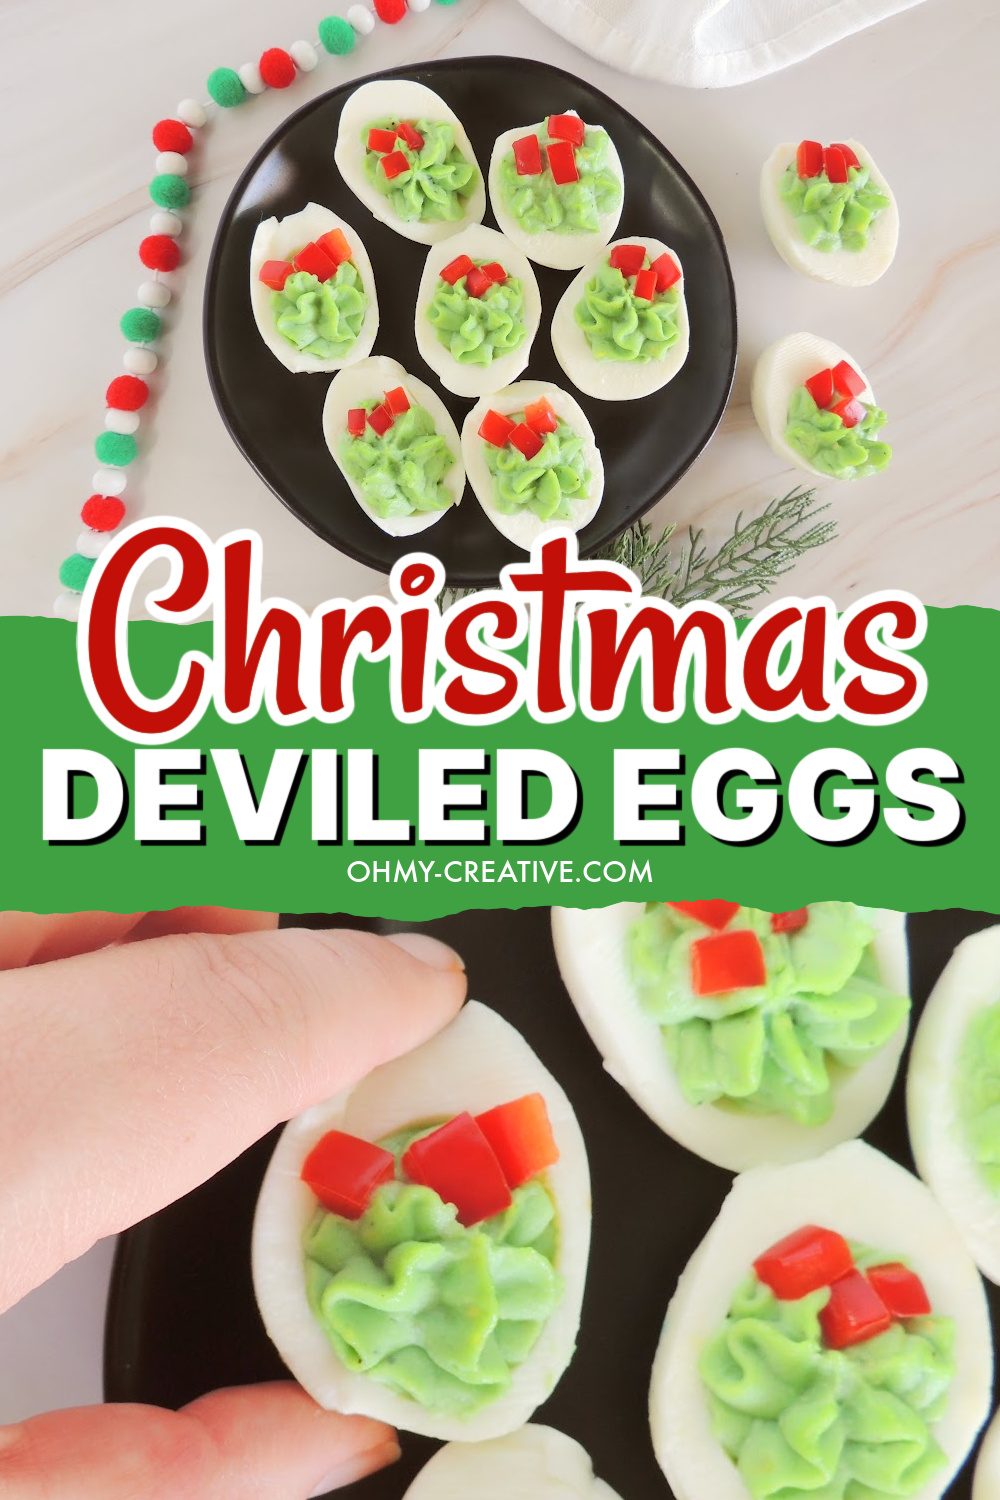 Double image Pinterest image of Christmas deviled eggs that look like a Christmas wreath. One photo is a closeup and one is a platter of Christmas deviled eggs.